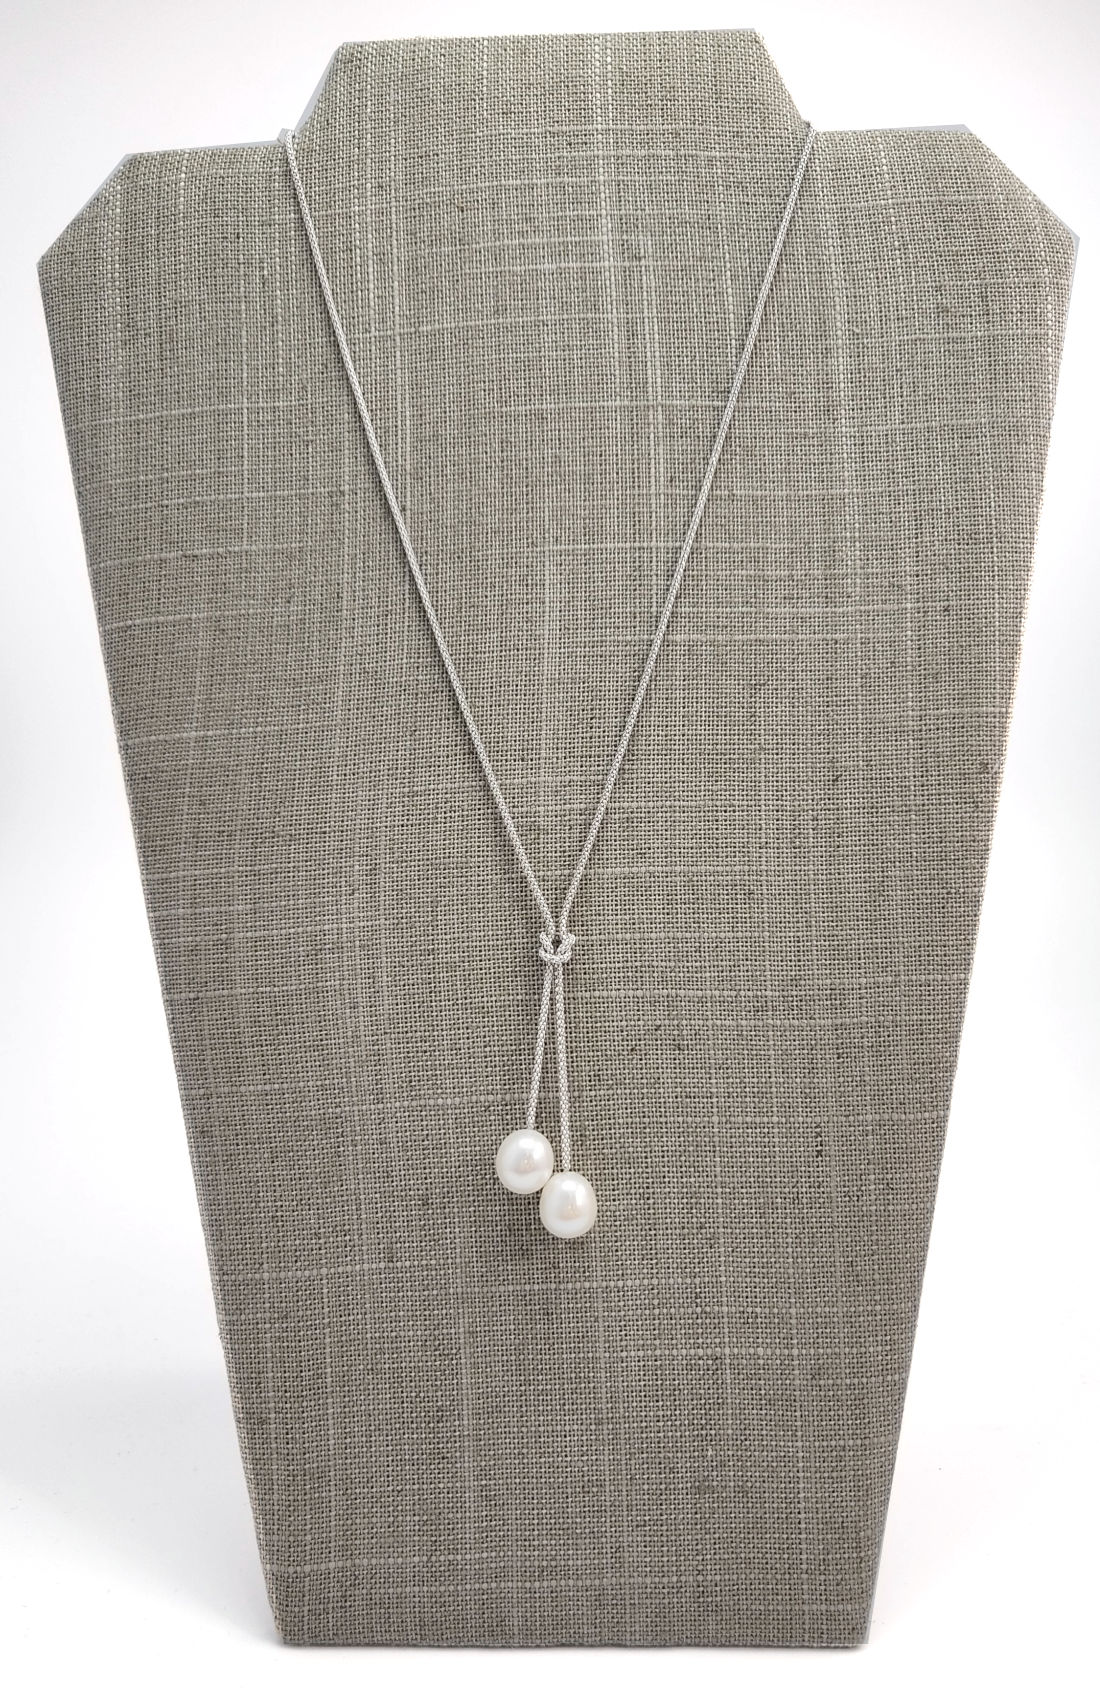 Pearl necklace with double pearl drop in front